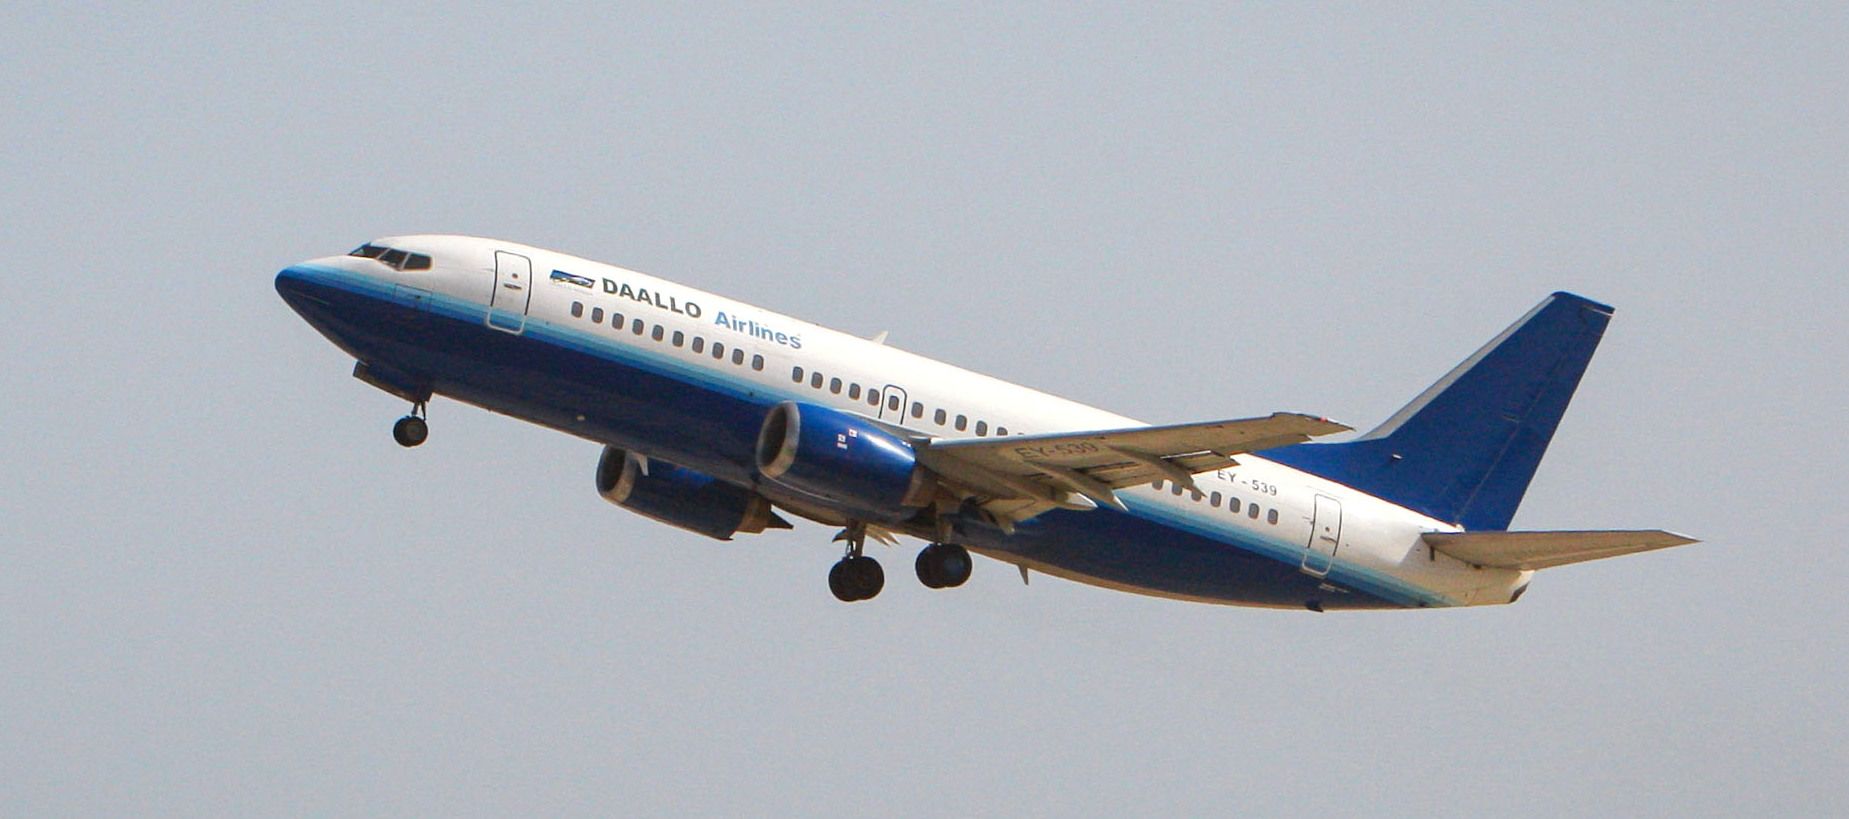 A Daallo Airlines Boeing 737-300 flying through the air.